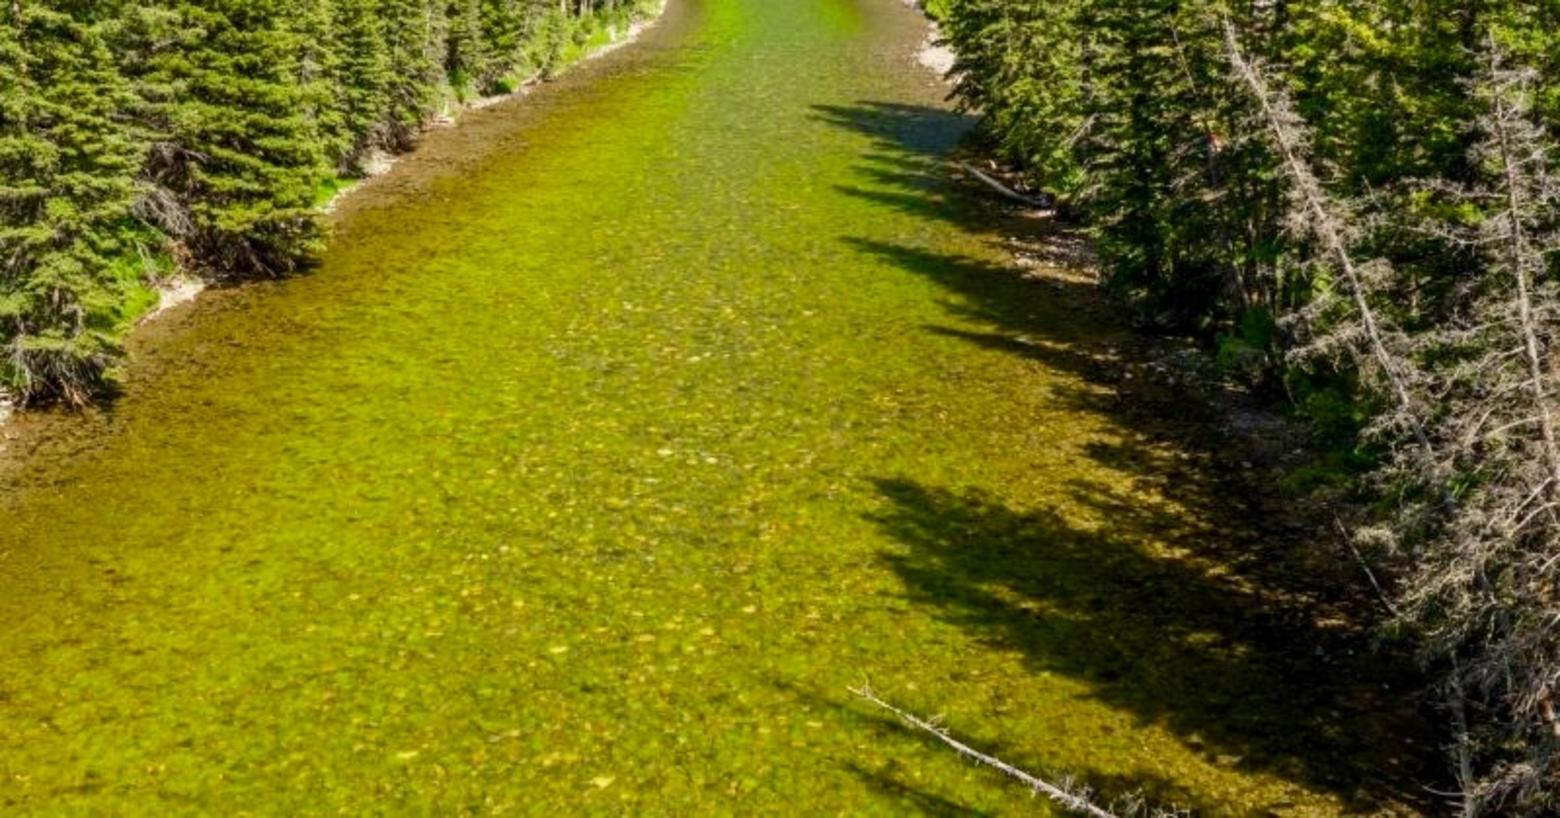 For several summers running, the main Gallatin River downstream from Big Sky, Montana has run not crystal clear but pea green from algae blooms related to nutrients flowing into the river from various kinds of development. Photo courtesy Guy Alsentzer/Upper Missouri Waterkeeper